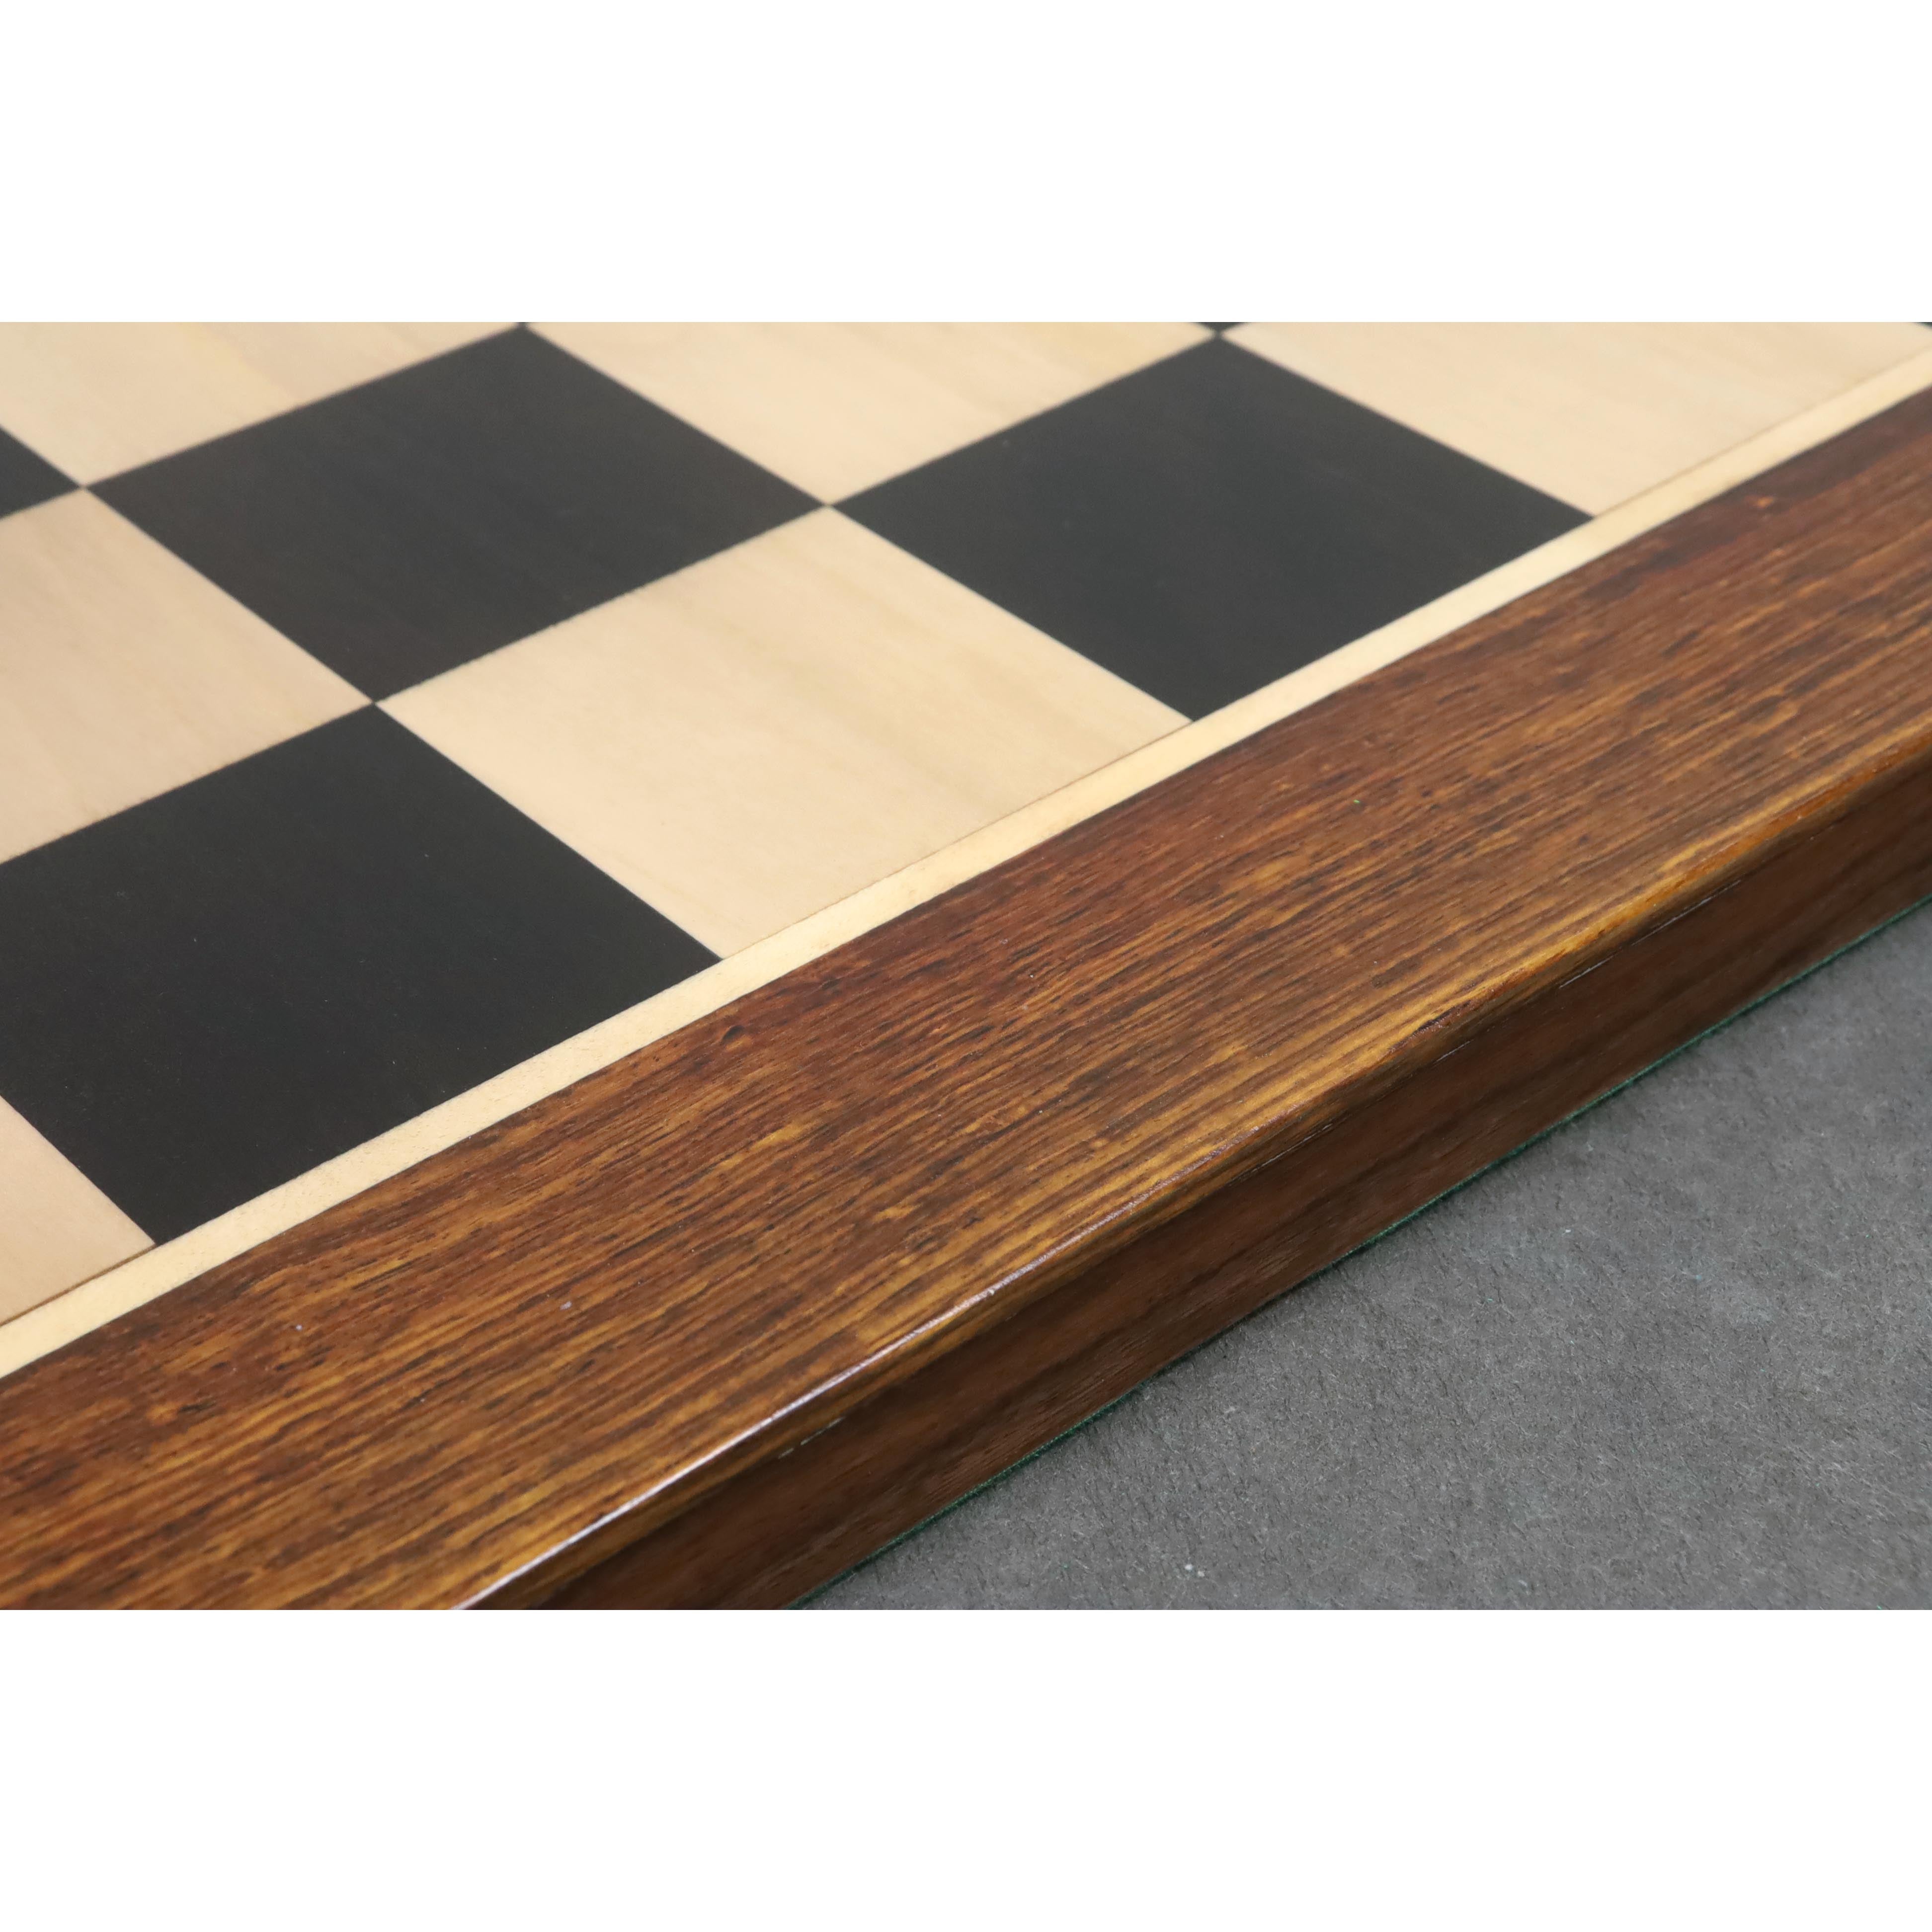 Combo of 4.1" Pro Staunton Black & White Lacquered Wooden Chess Pieces with Chessboard and Storage Box